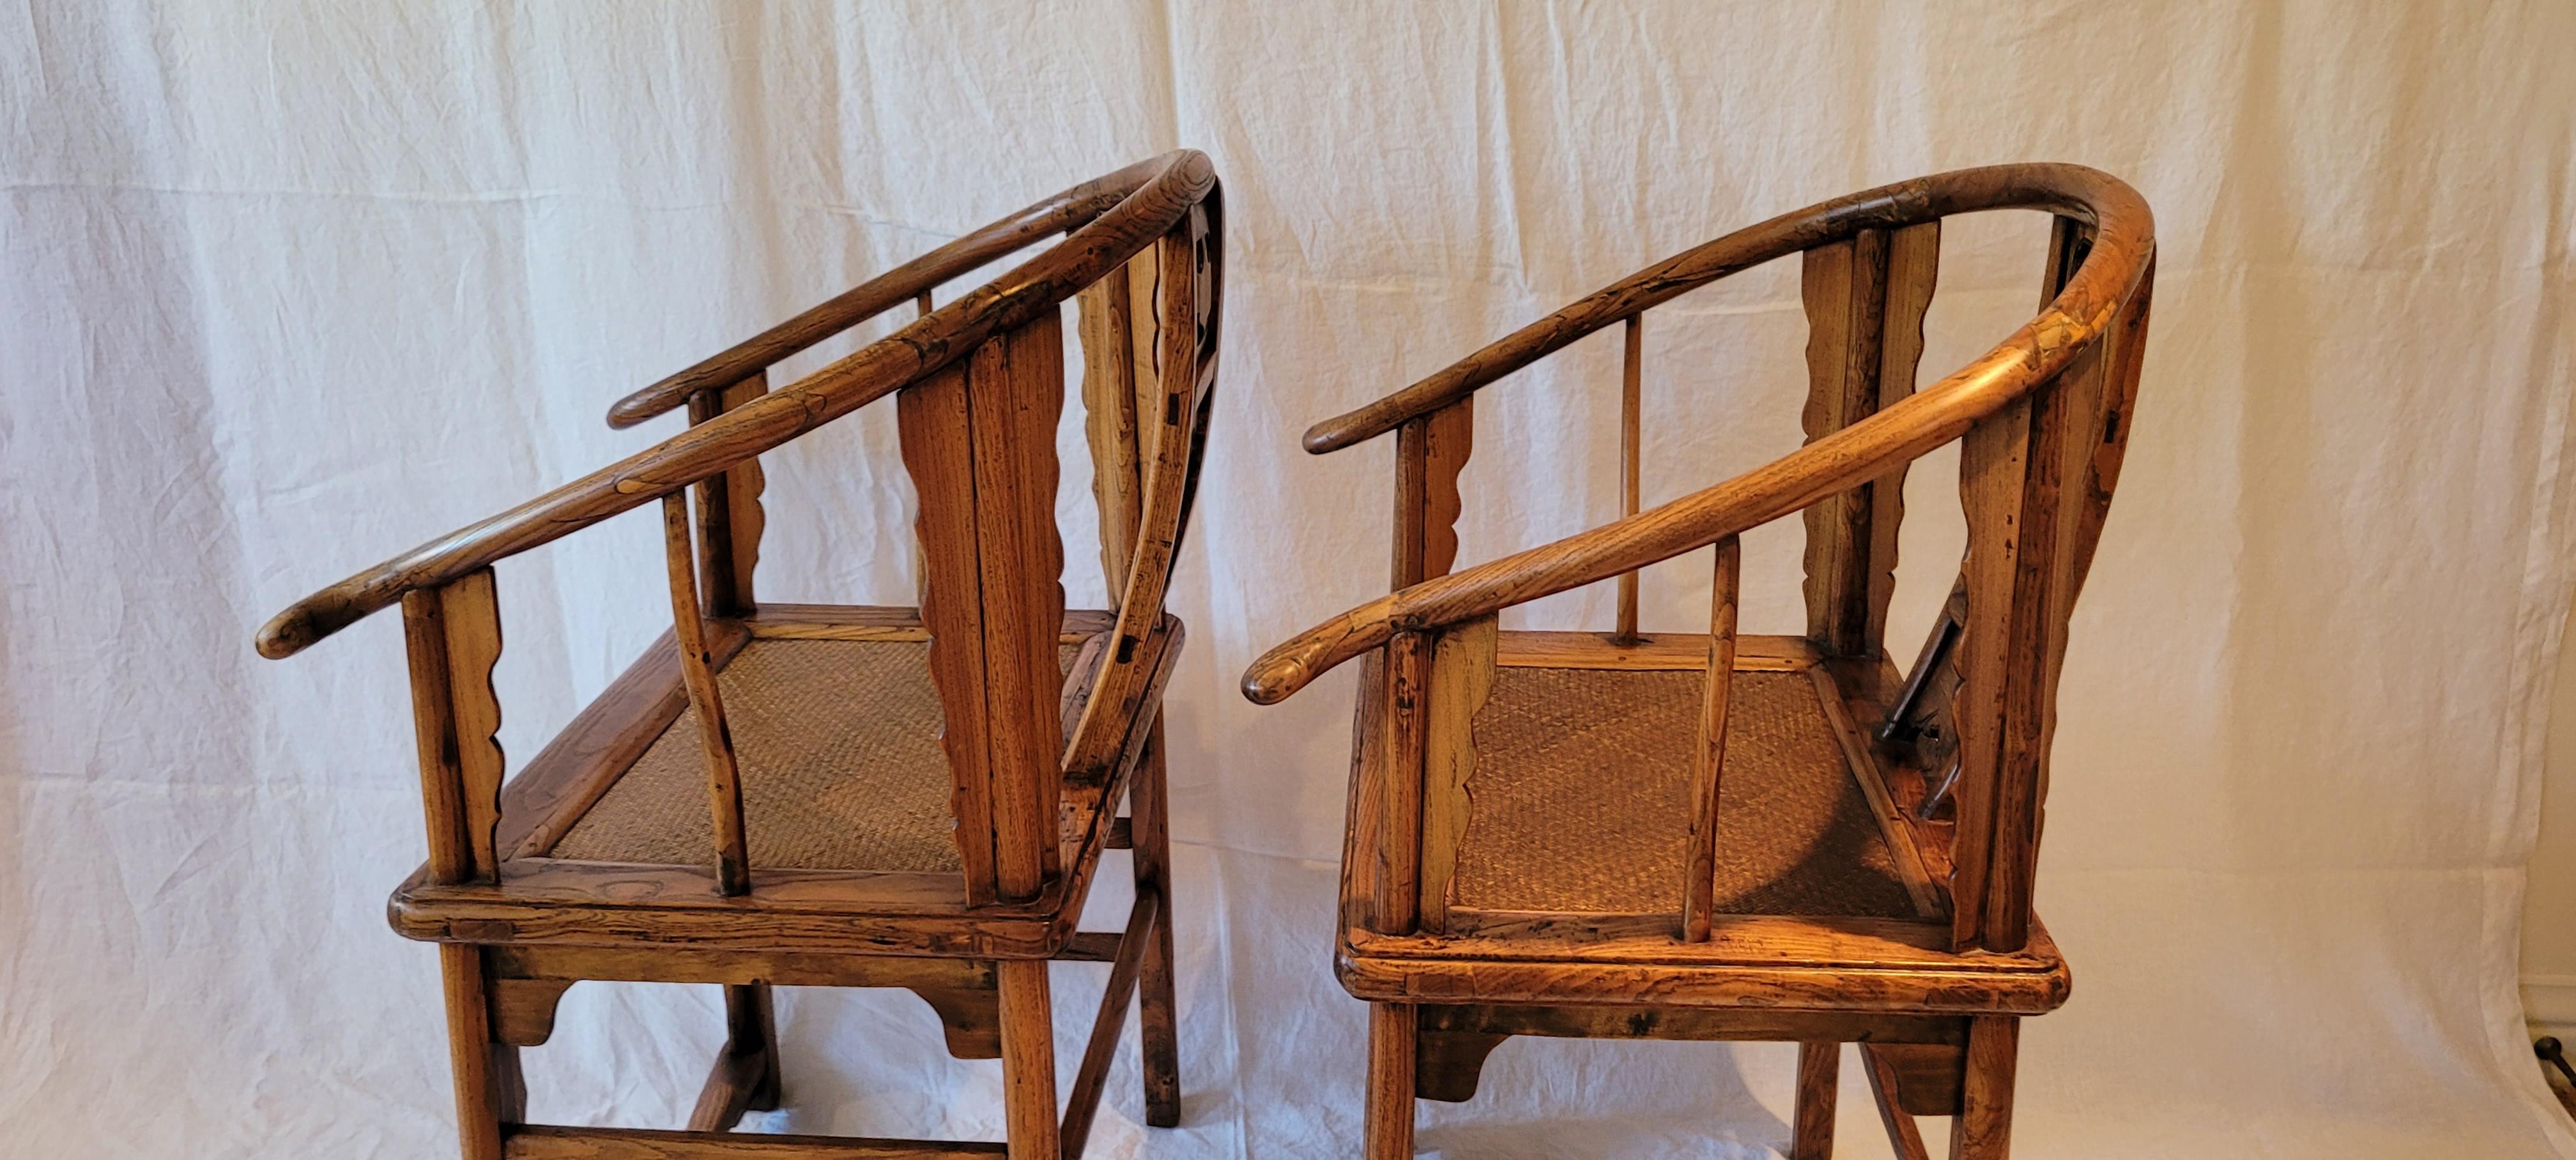 Pair of Horseshoe Back Chairs - mid 19th Century For Sale 1